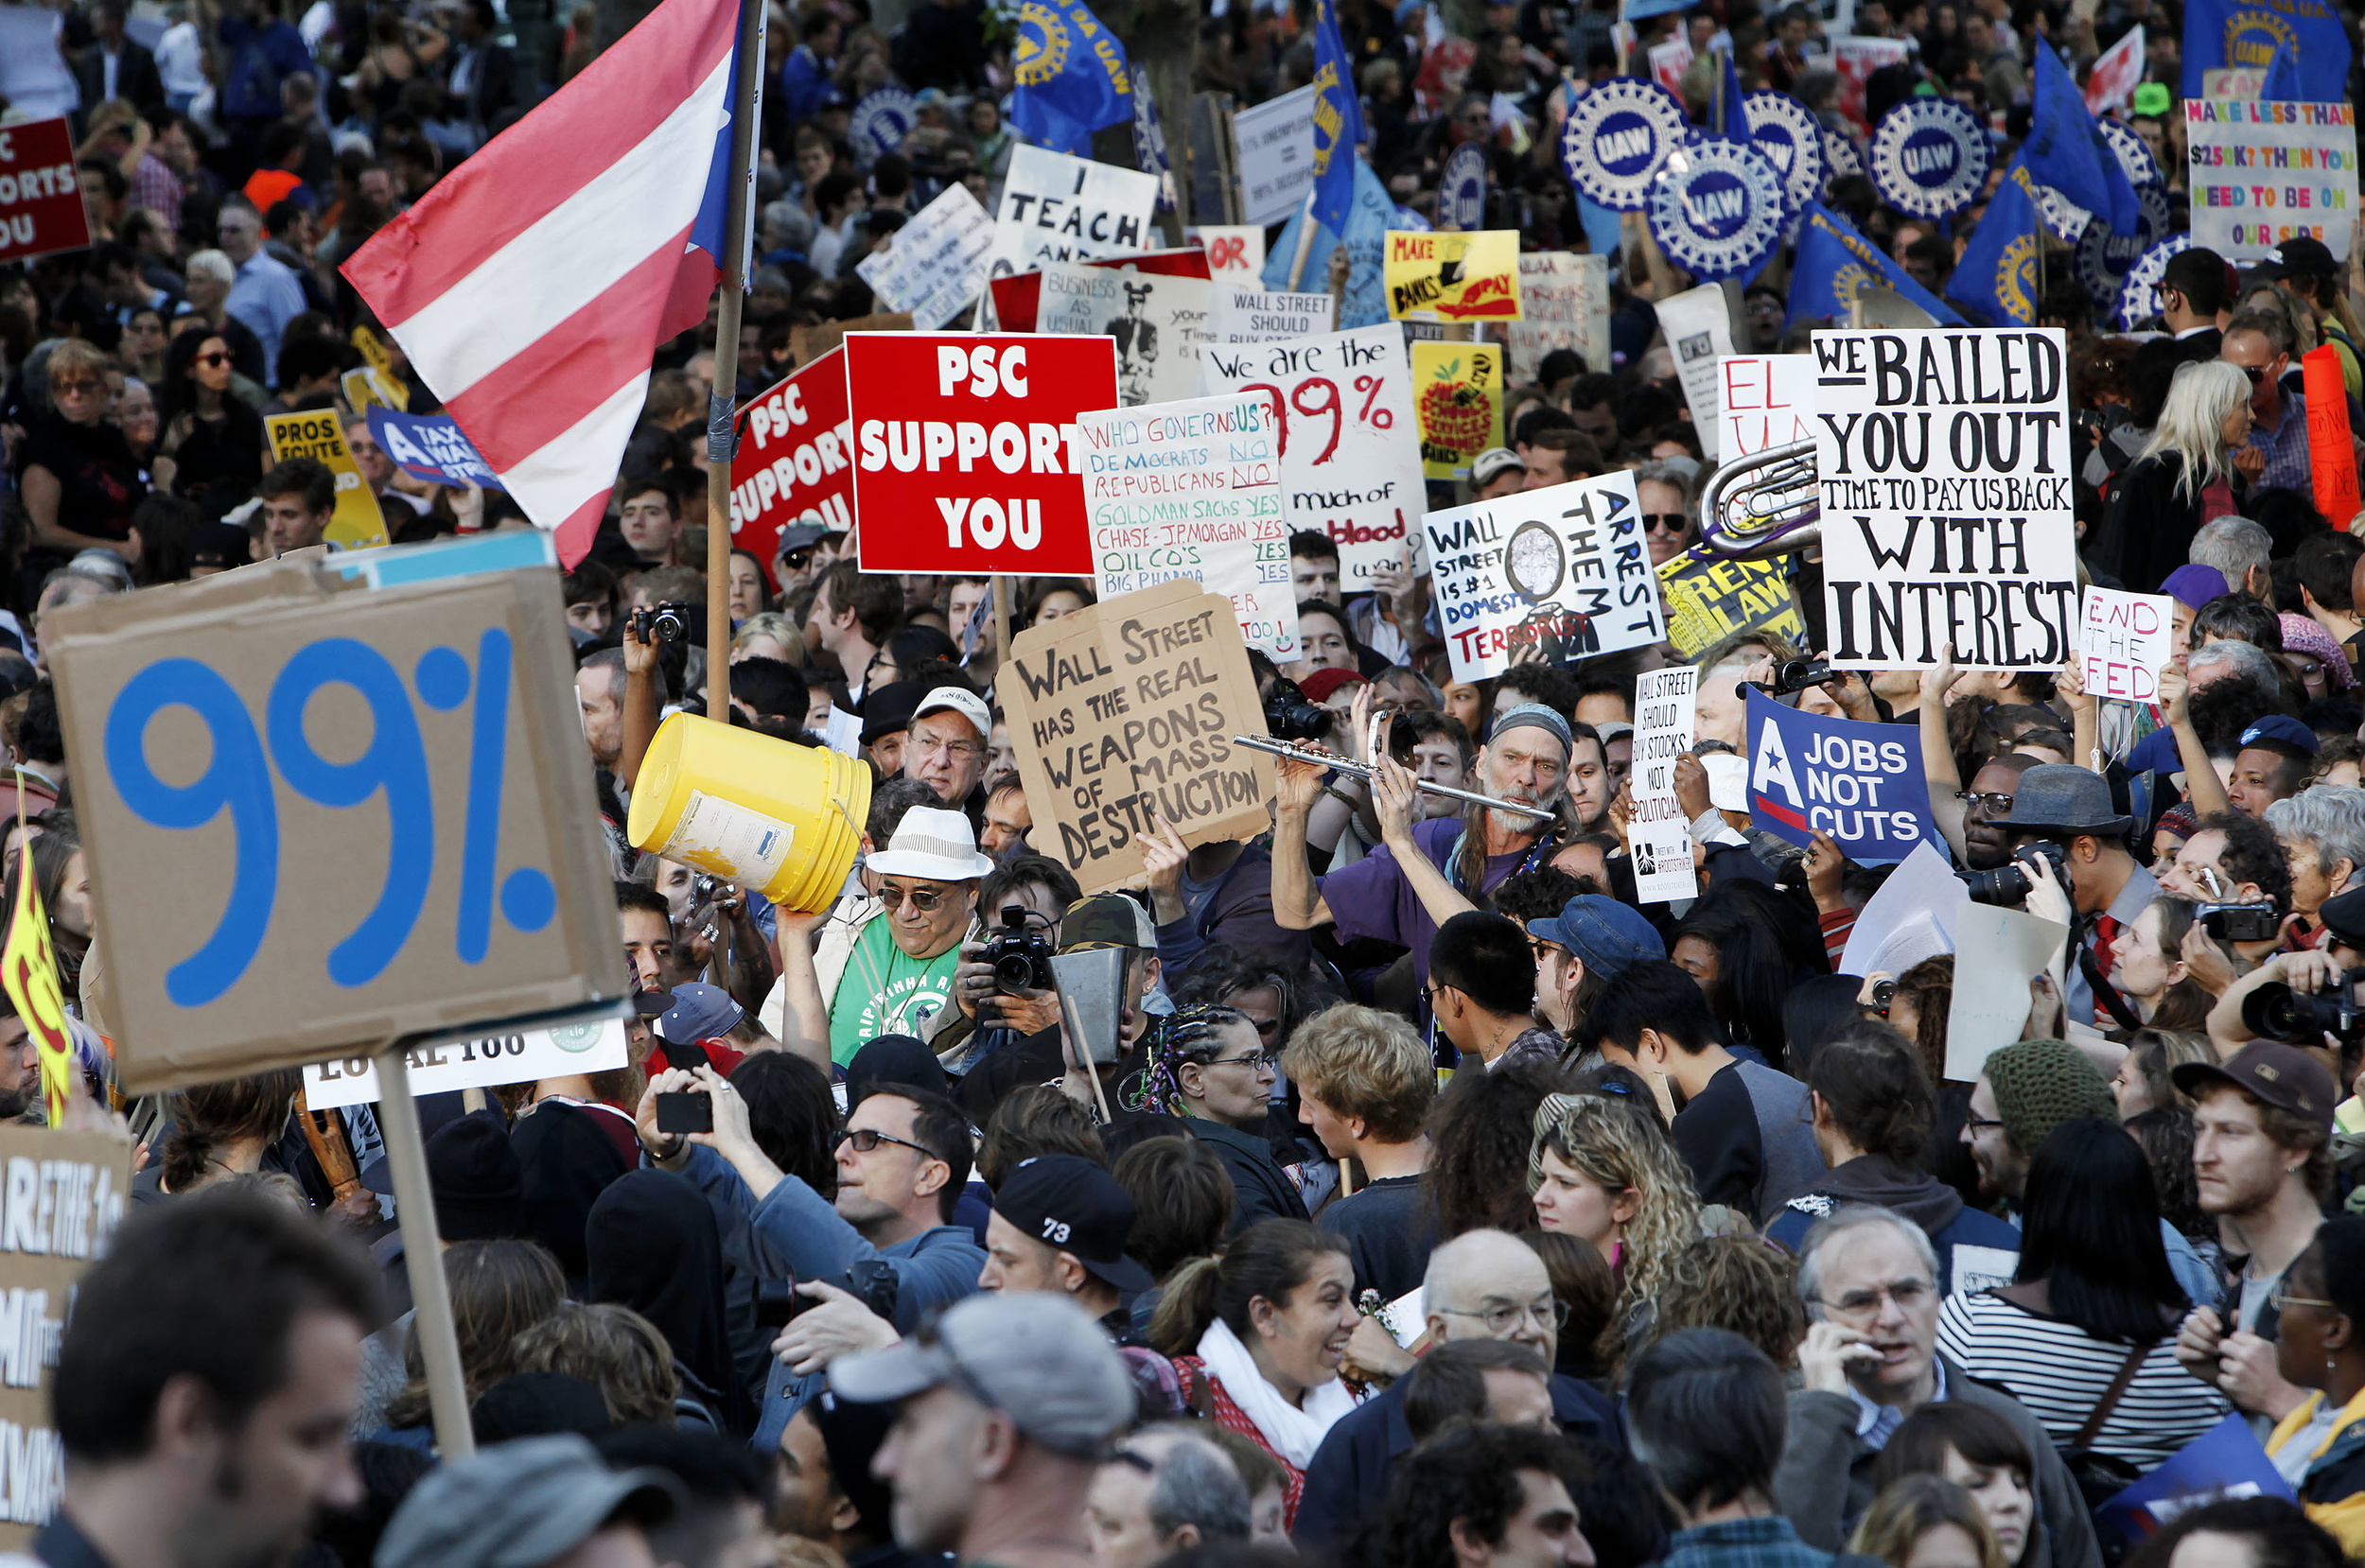 An 'Occupy Wall Street' demonstration